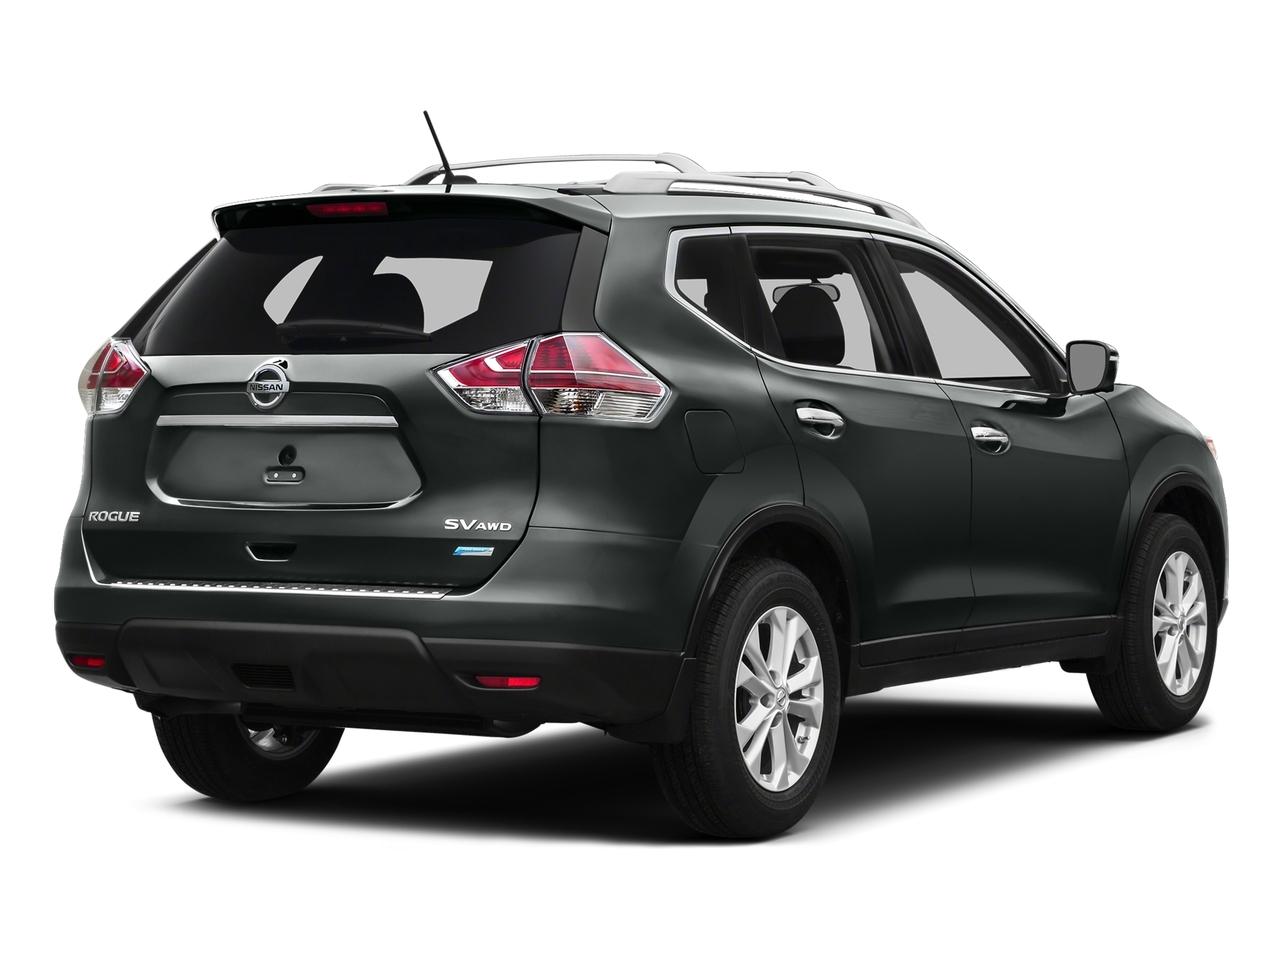 2016 Nissan Rogue Vehicle Photo in Winter Park, FL 32792